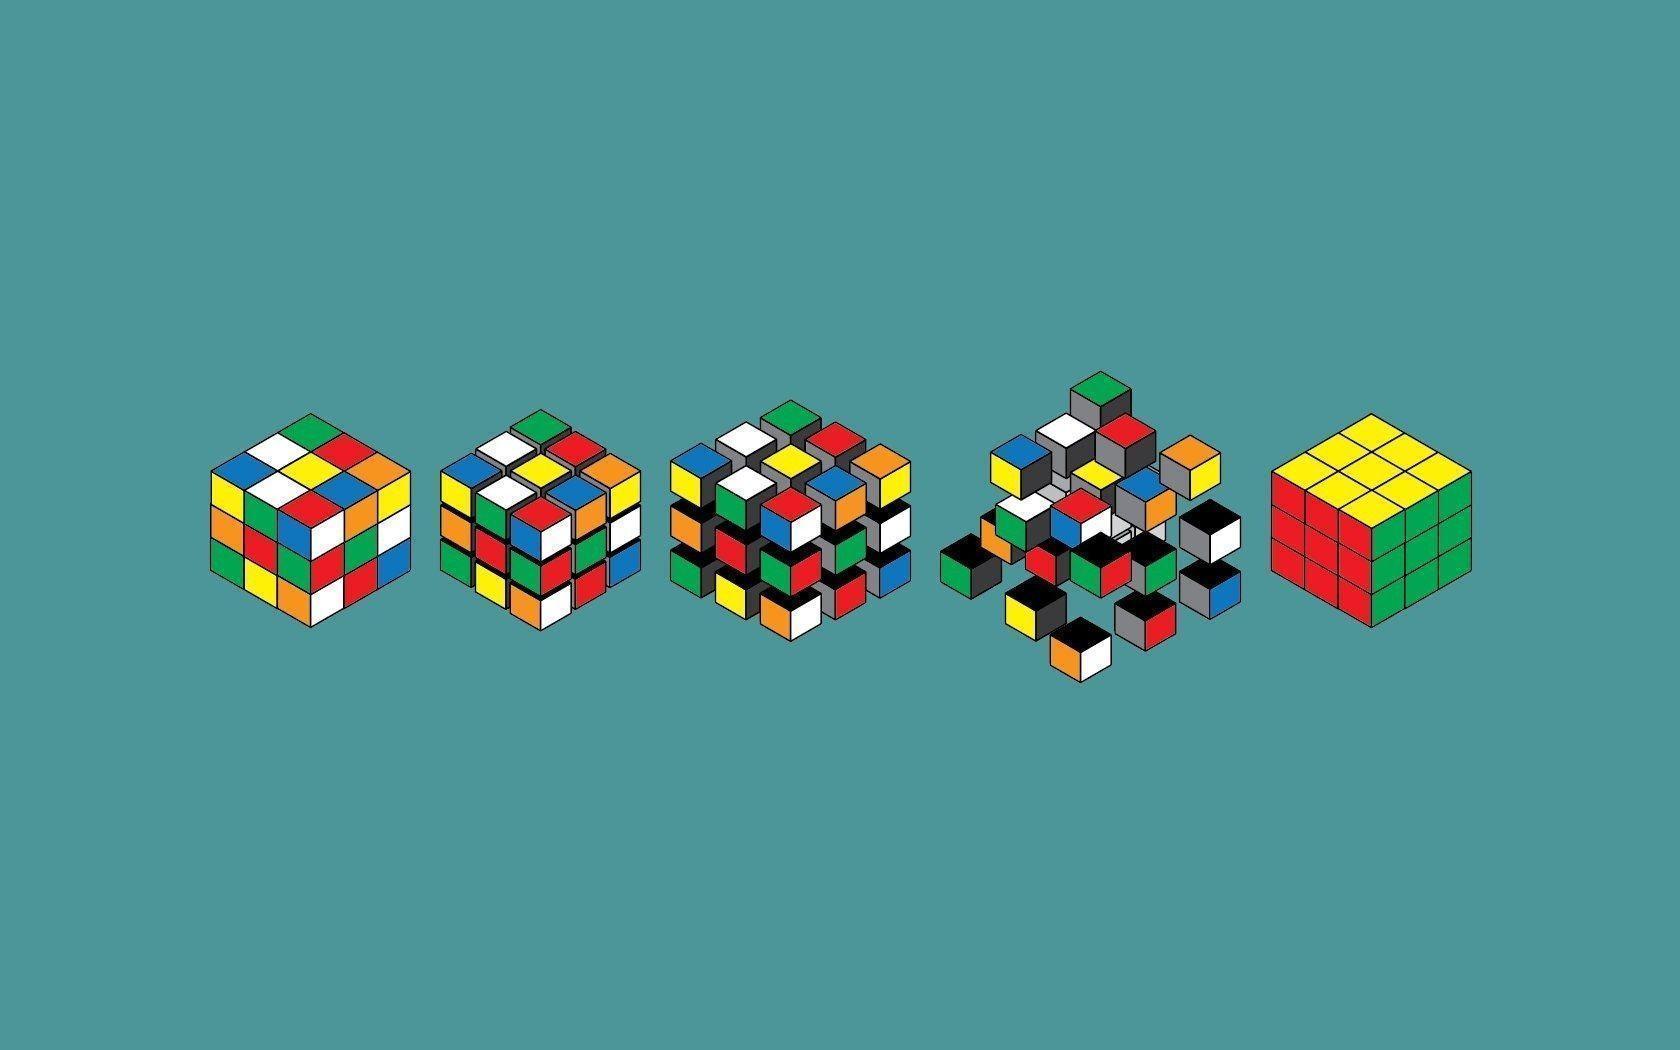 Rubiks Cube Fragments Simple Background Wallpaper Image For Free Download   Pngtree